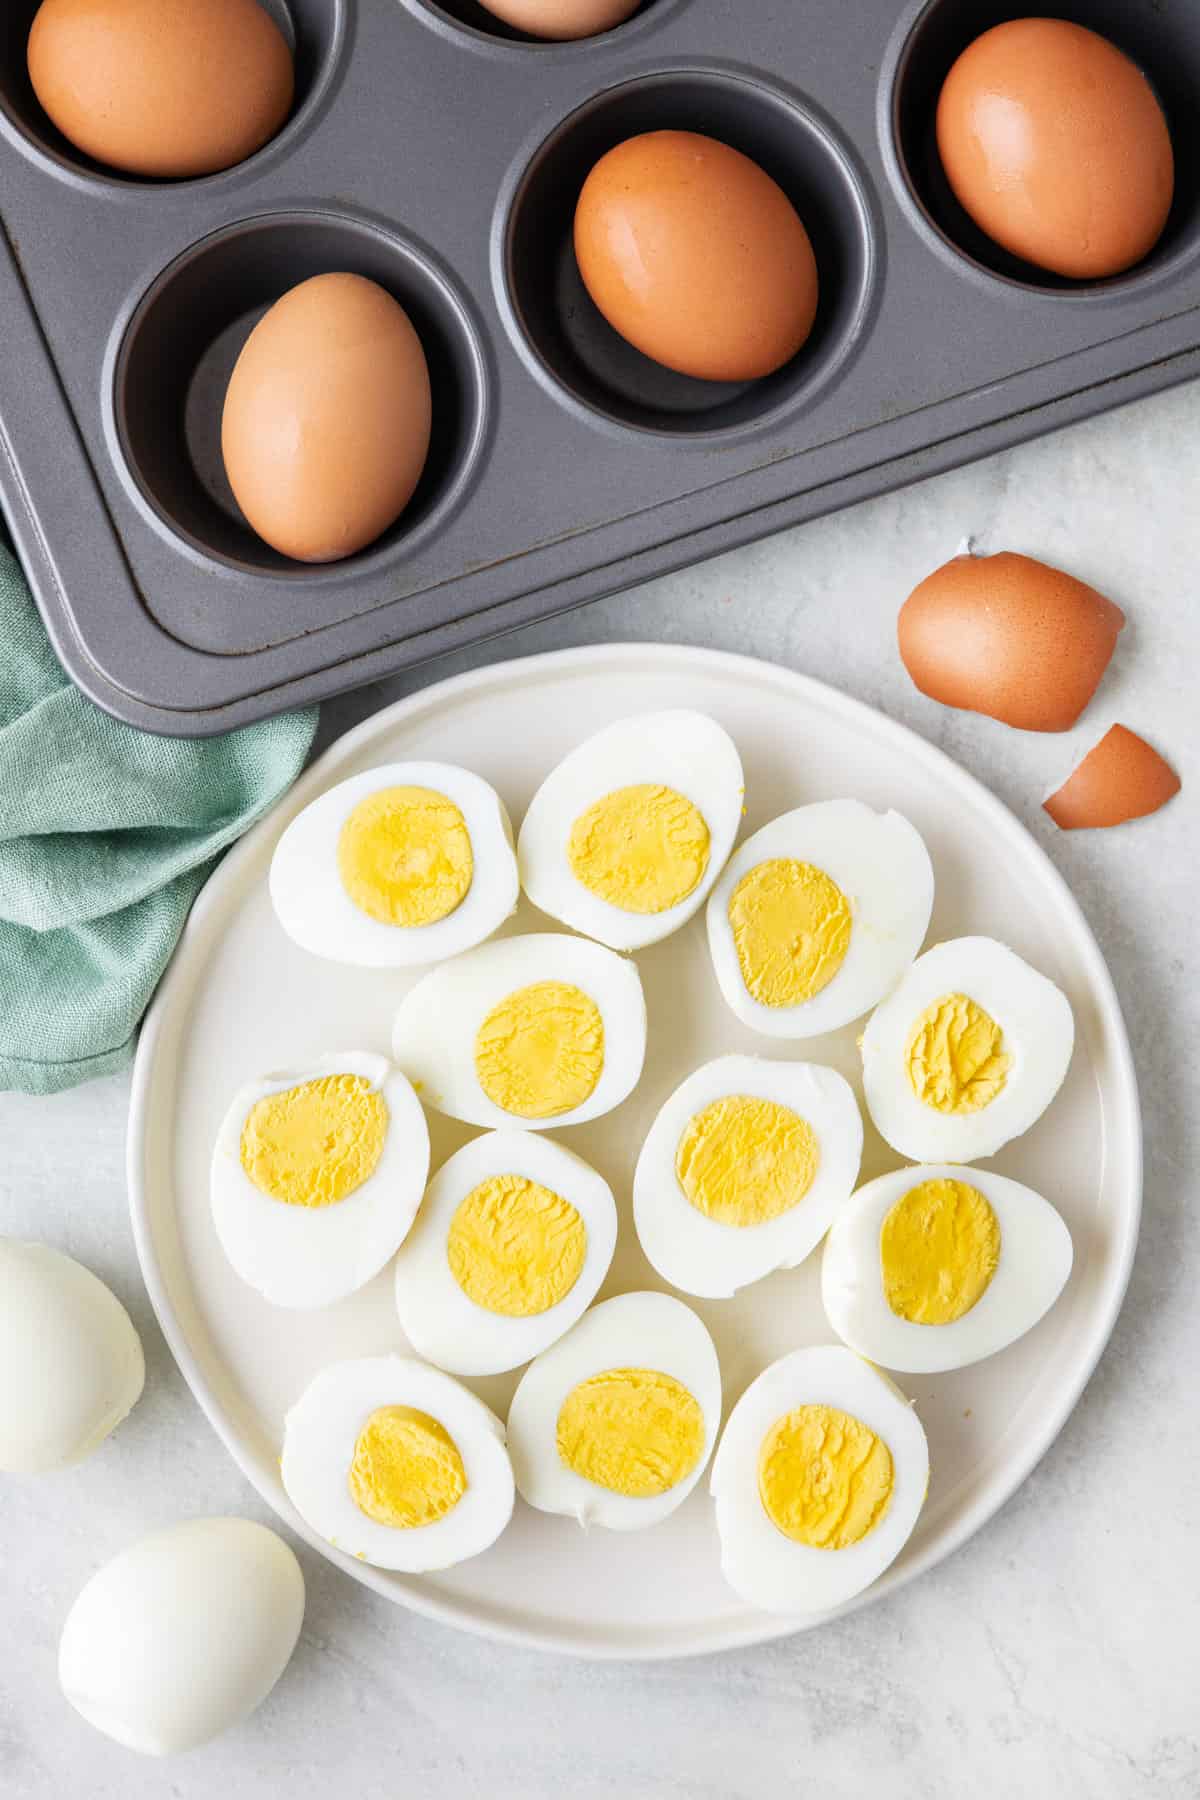 Hard boiled eggs on a plate split in half, with muffin pan of whole baked eggs in shell nearby.